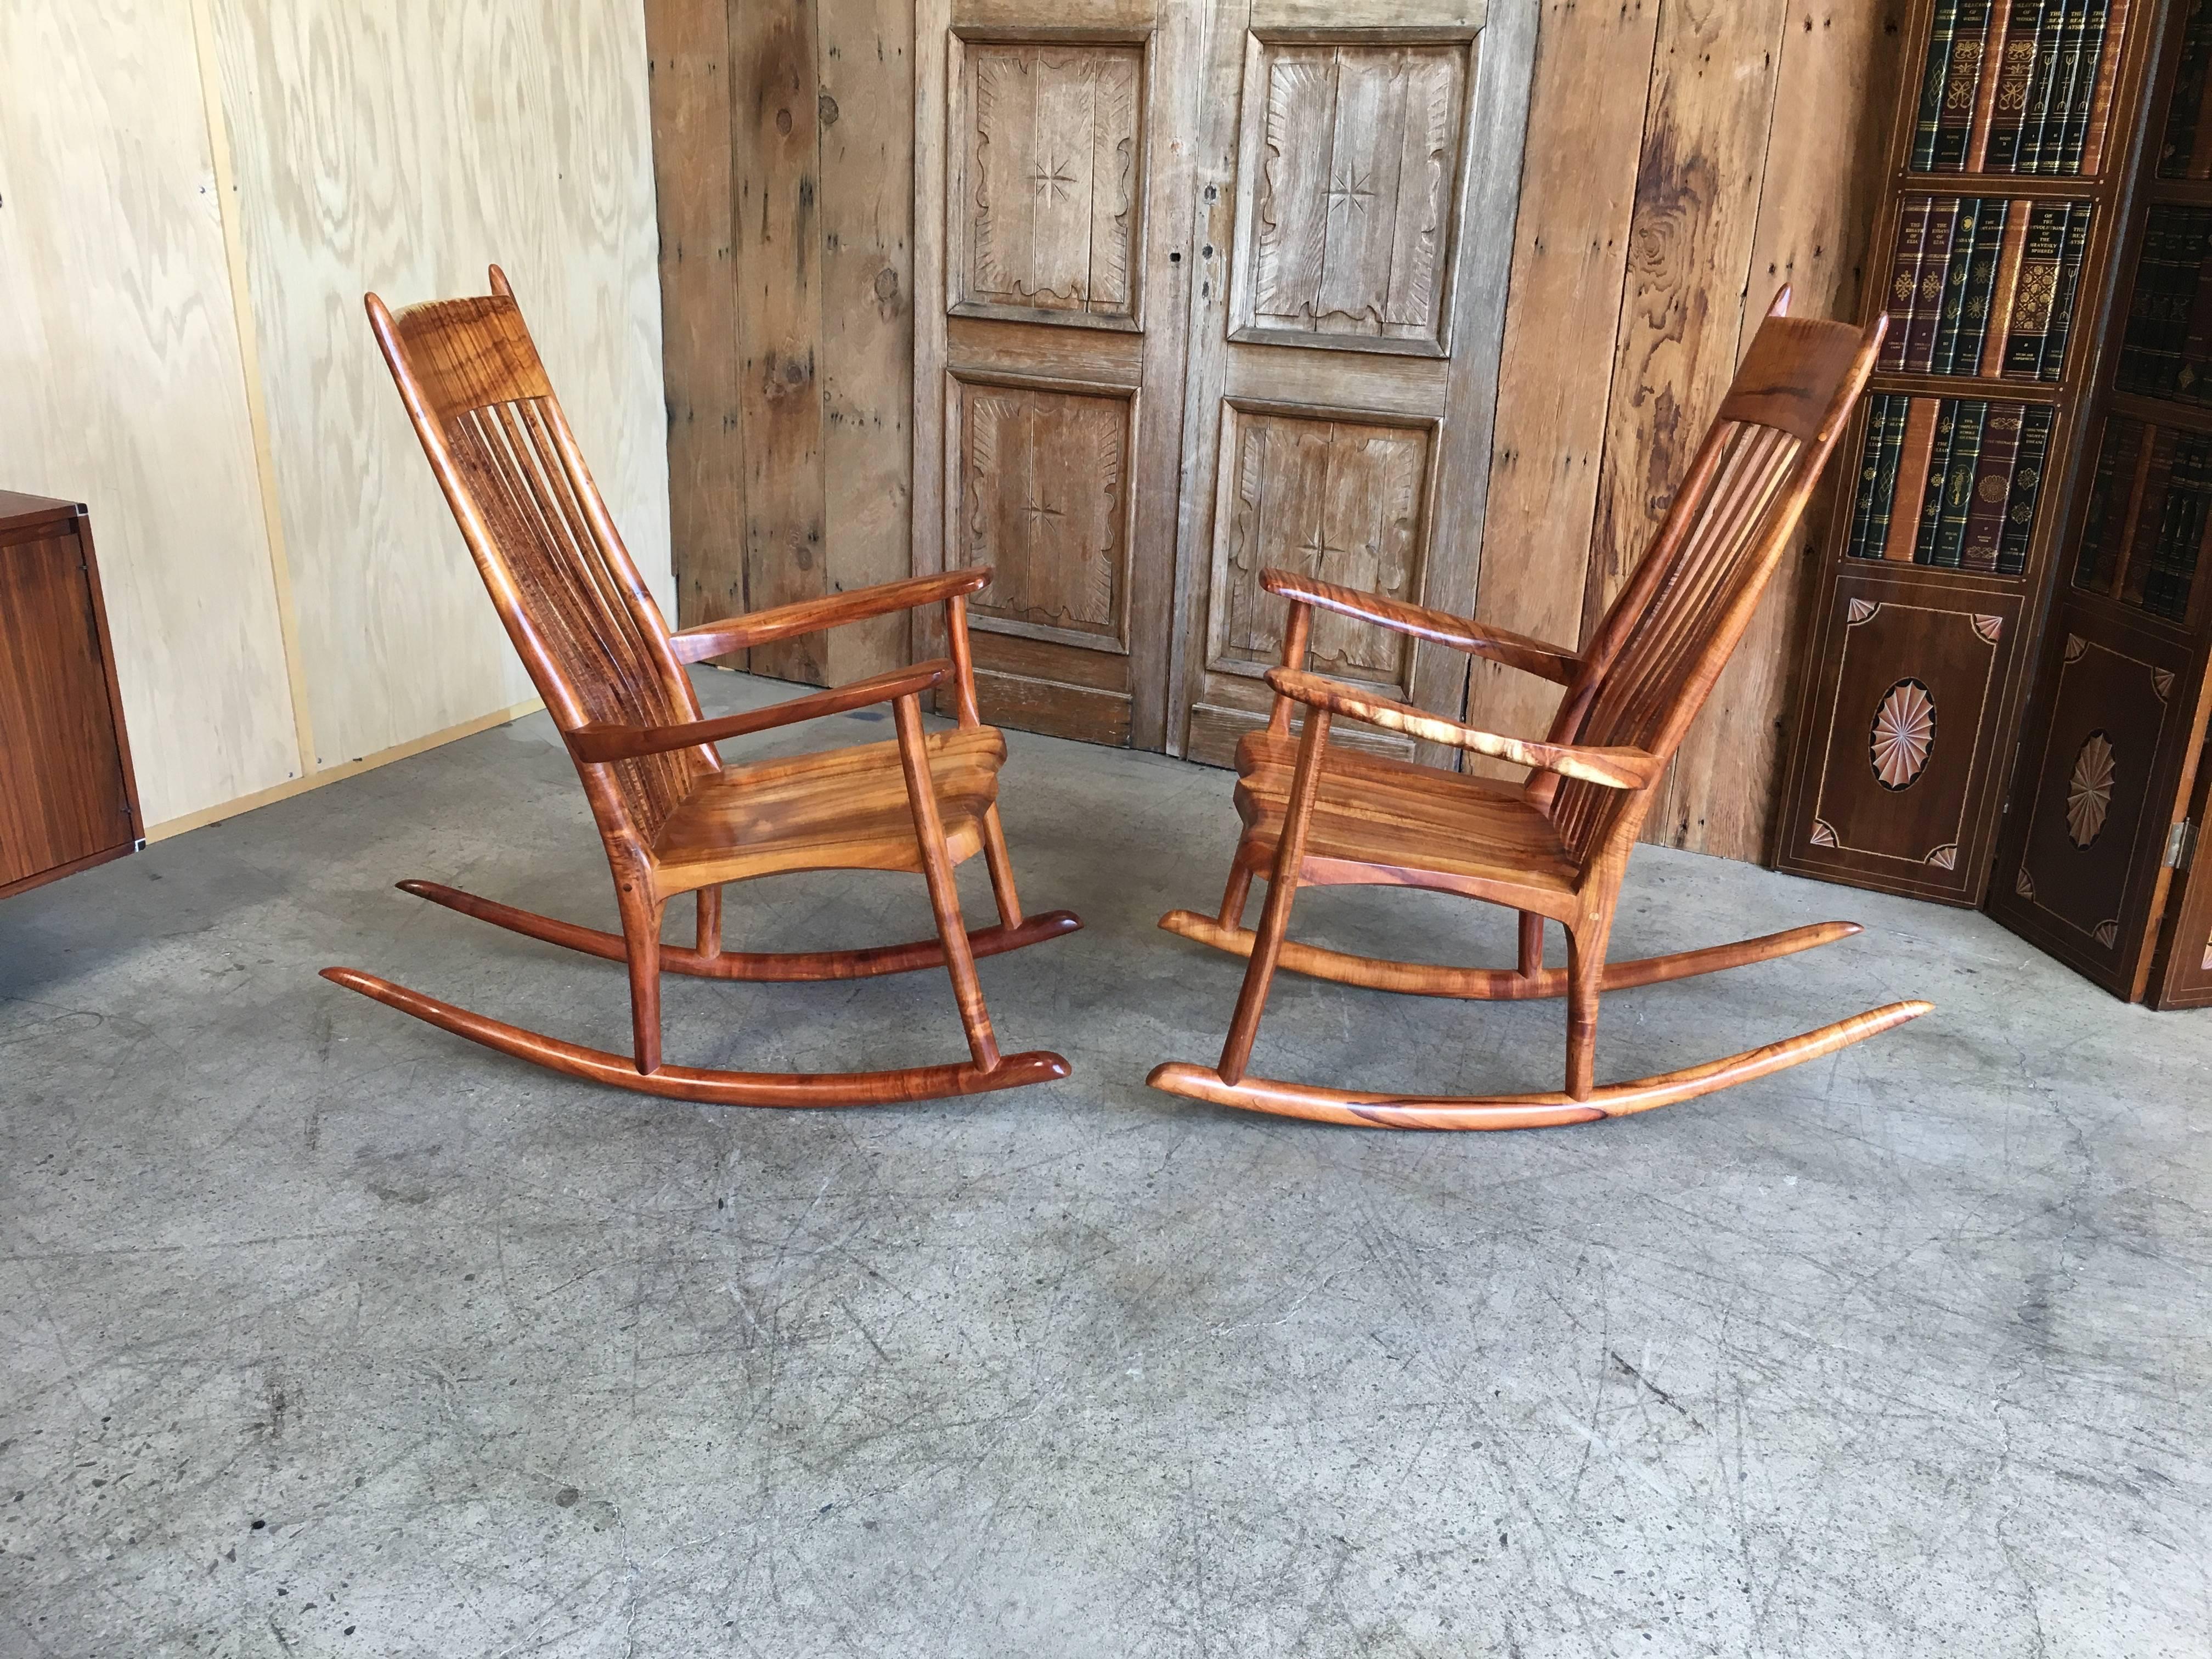 Hand-Crafted Studio Crafted Koa Wood Rocking Chairs by Stan Gollaher